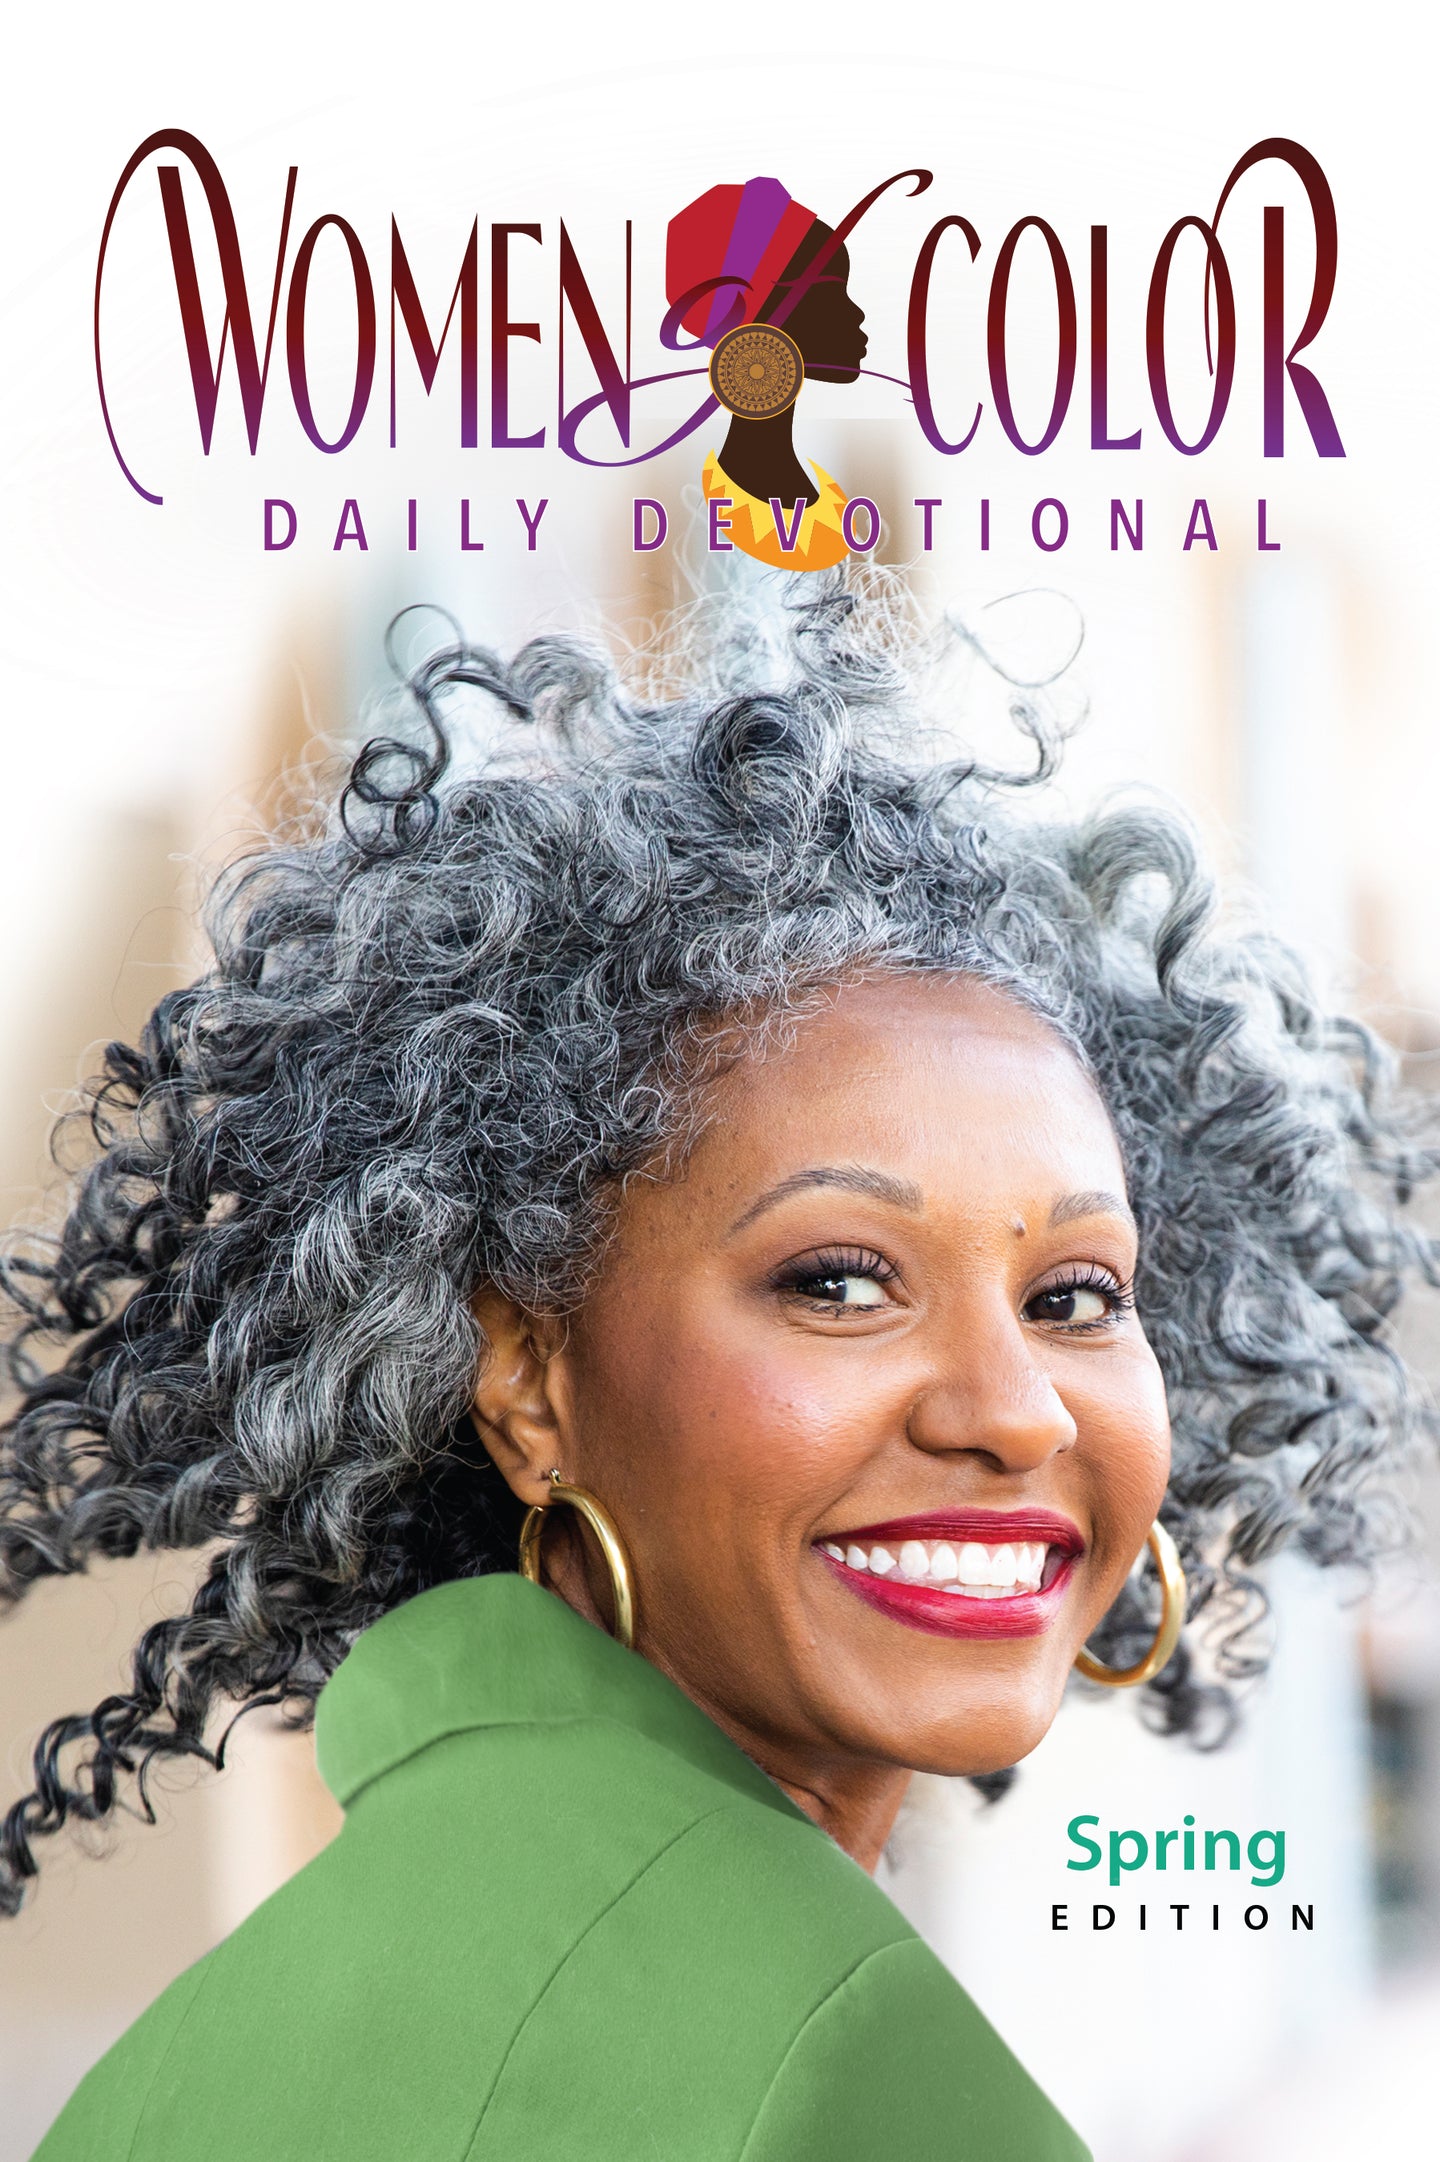 Women of Color Daily Devotional Spring Edition -POD- Print on Demand copy